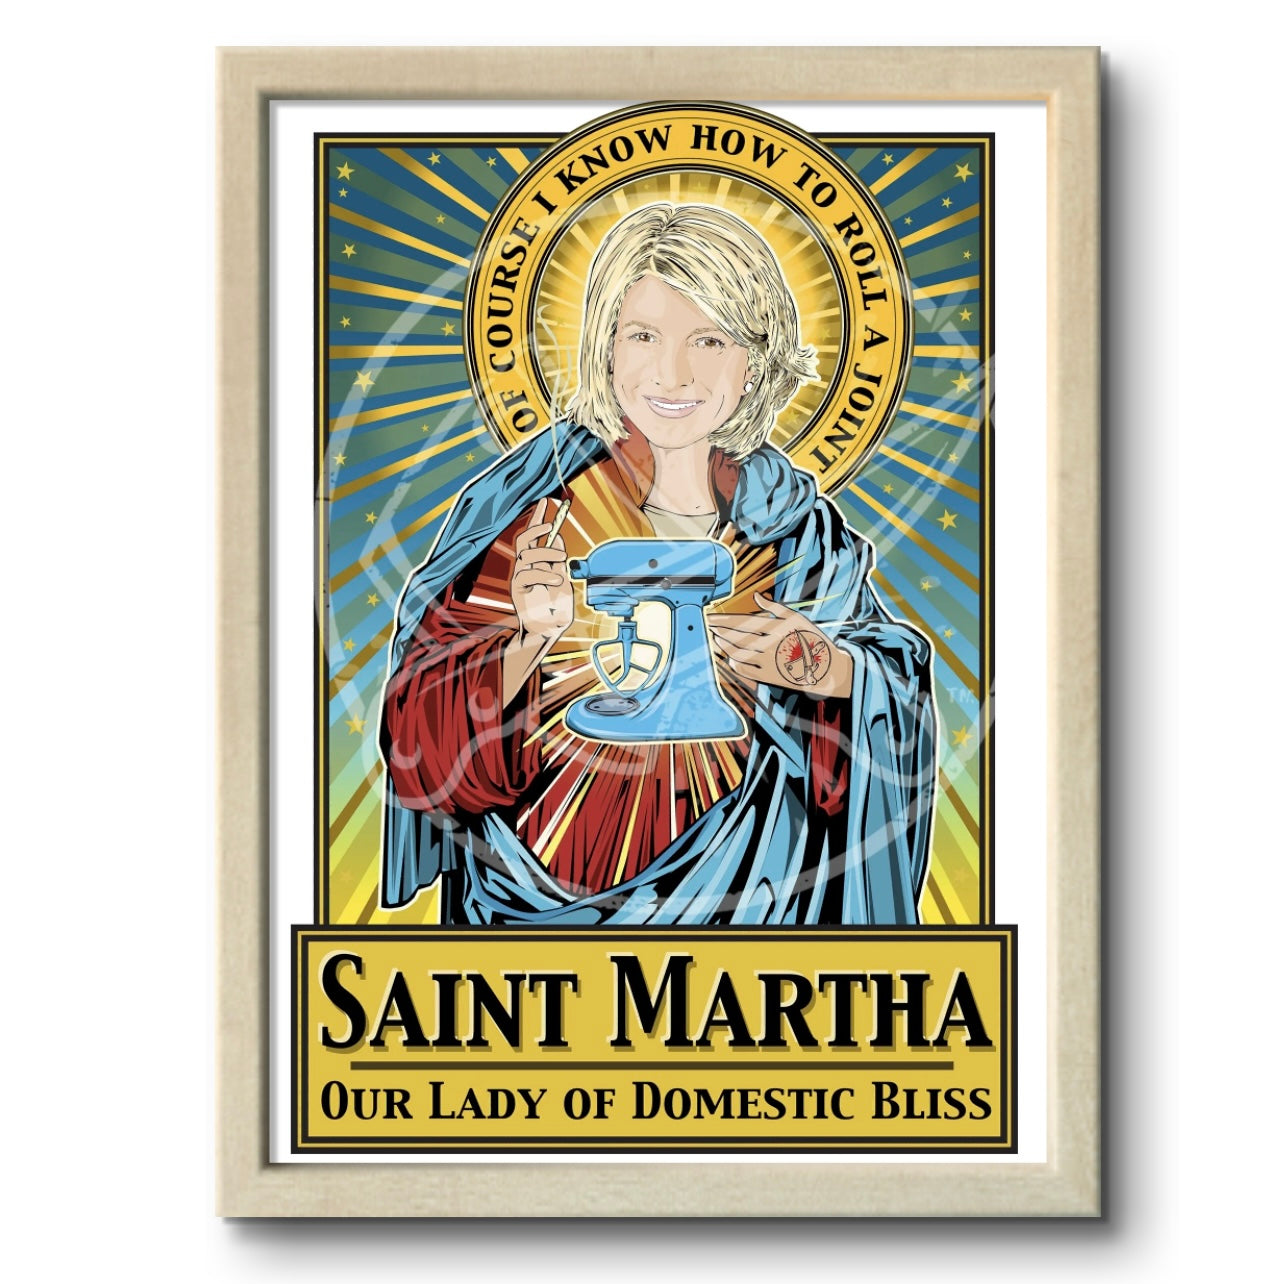 Saint Martha Our Lady of Domestic Bliss Poster